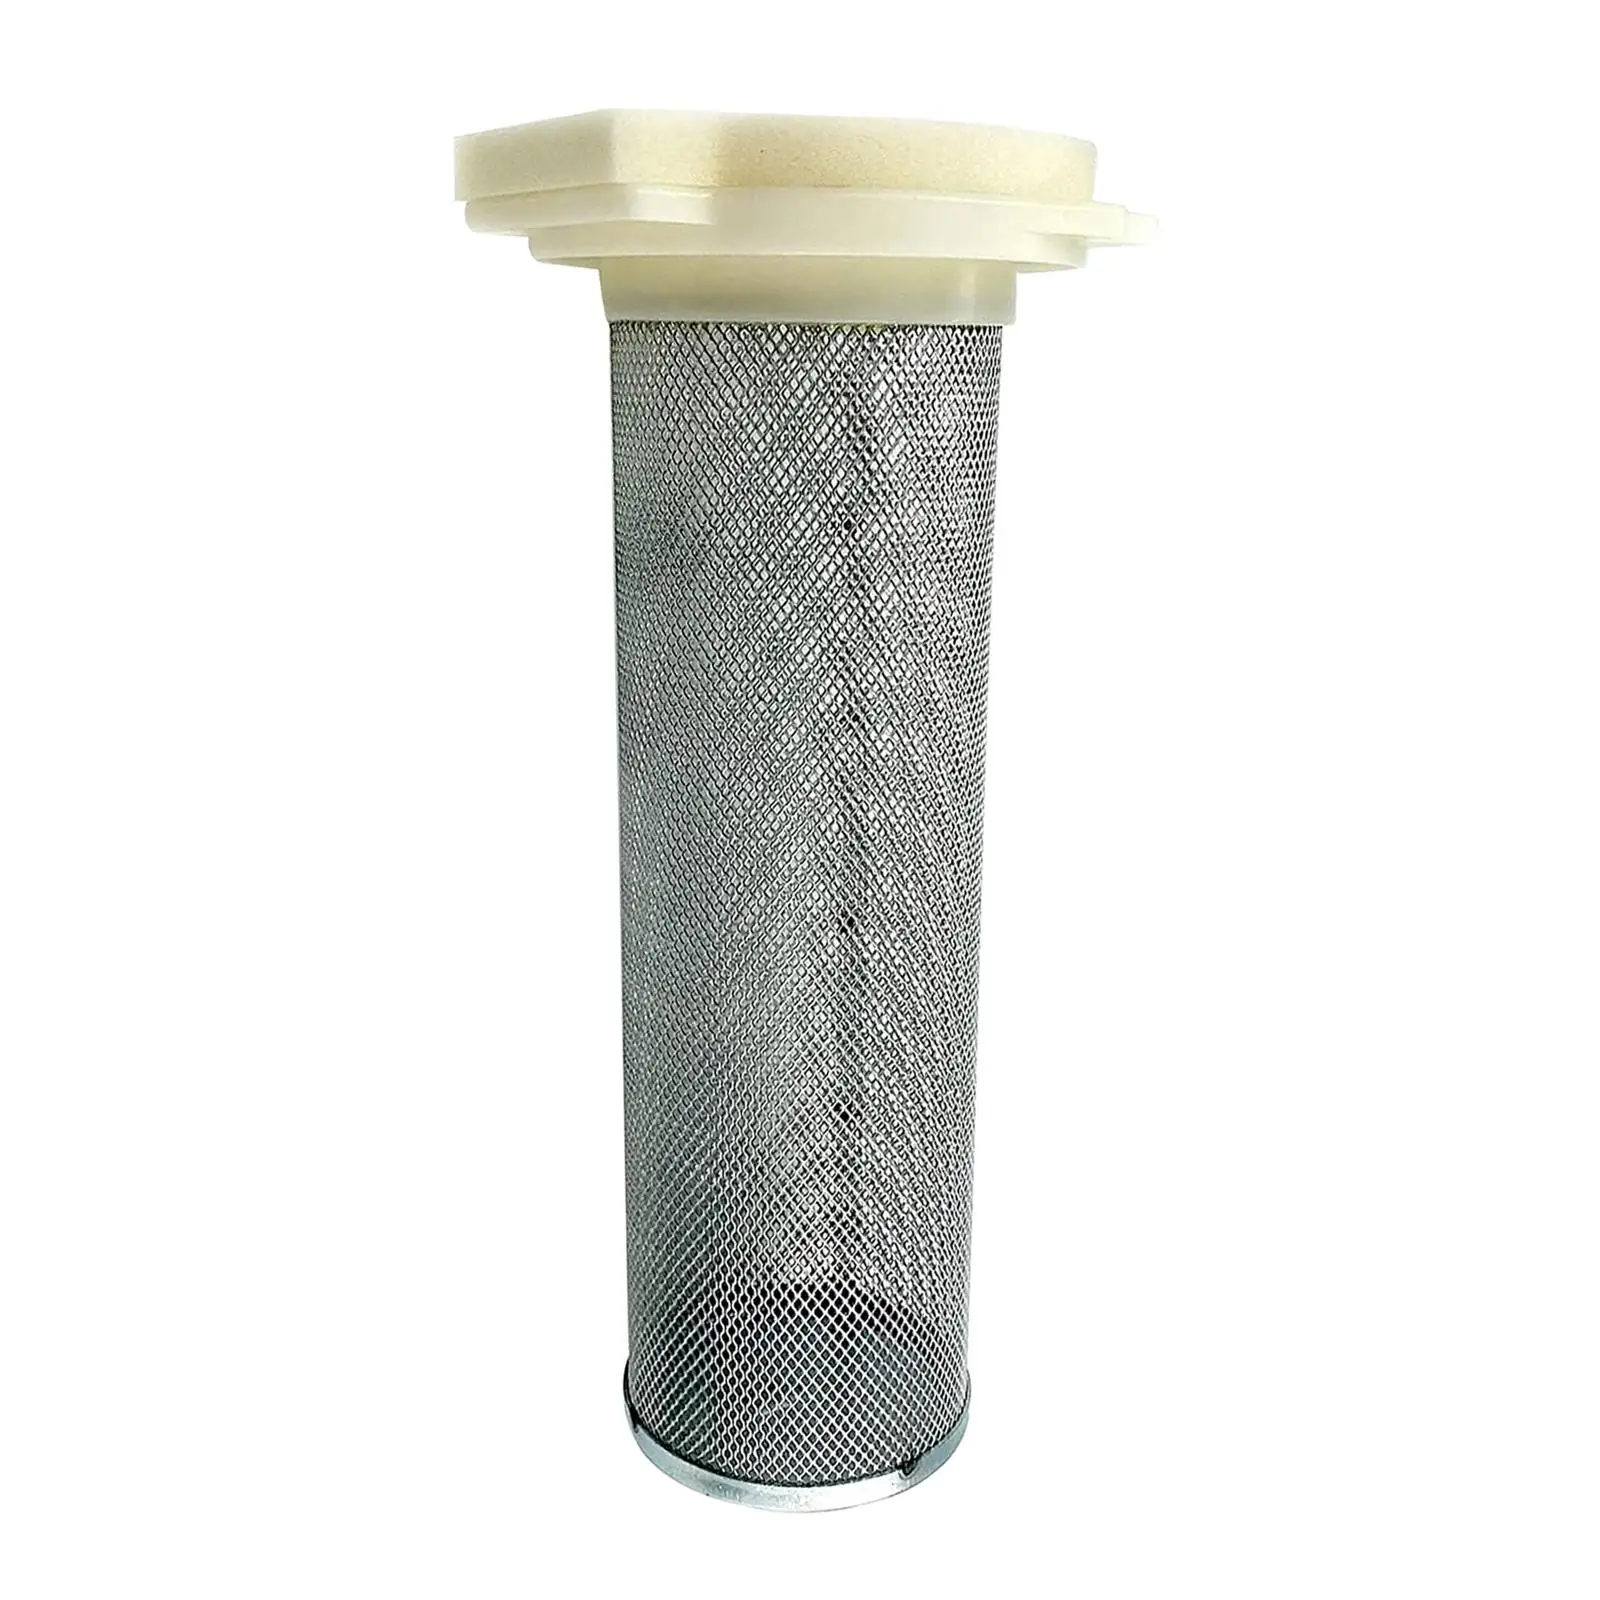 Intake Valve Air Filter Cage for    350 Accessories Replaces